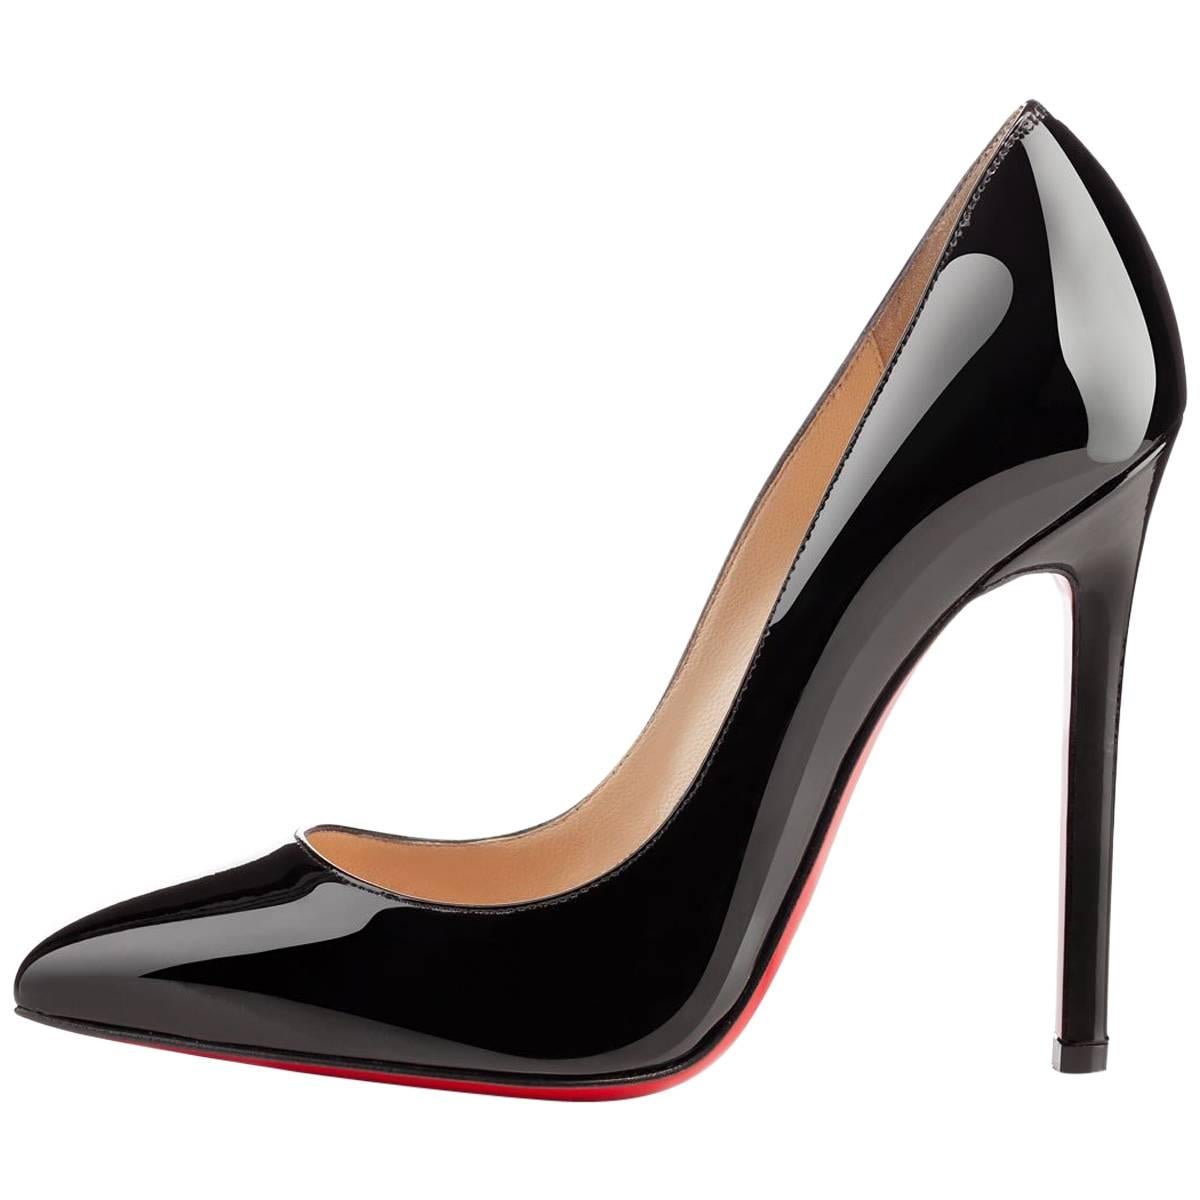 Christian Louboutin NEW Pigalle 120 Black Patent Leather High Heels Pumps in Box